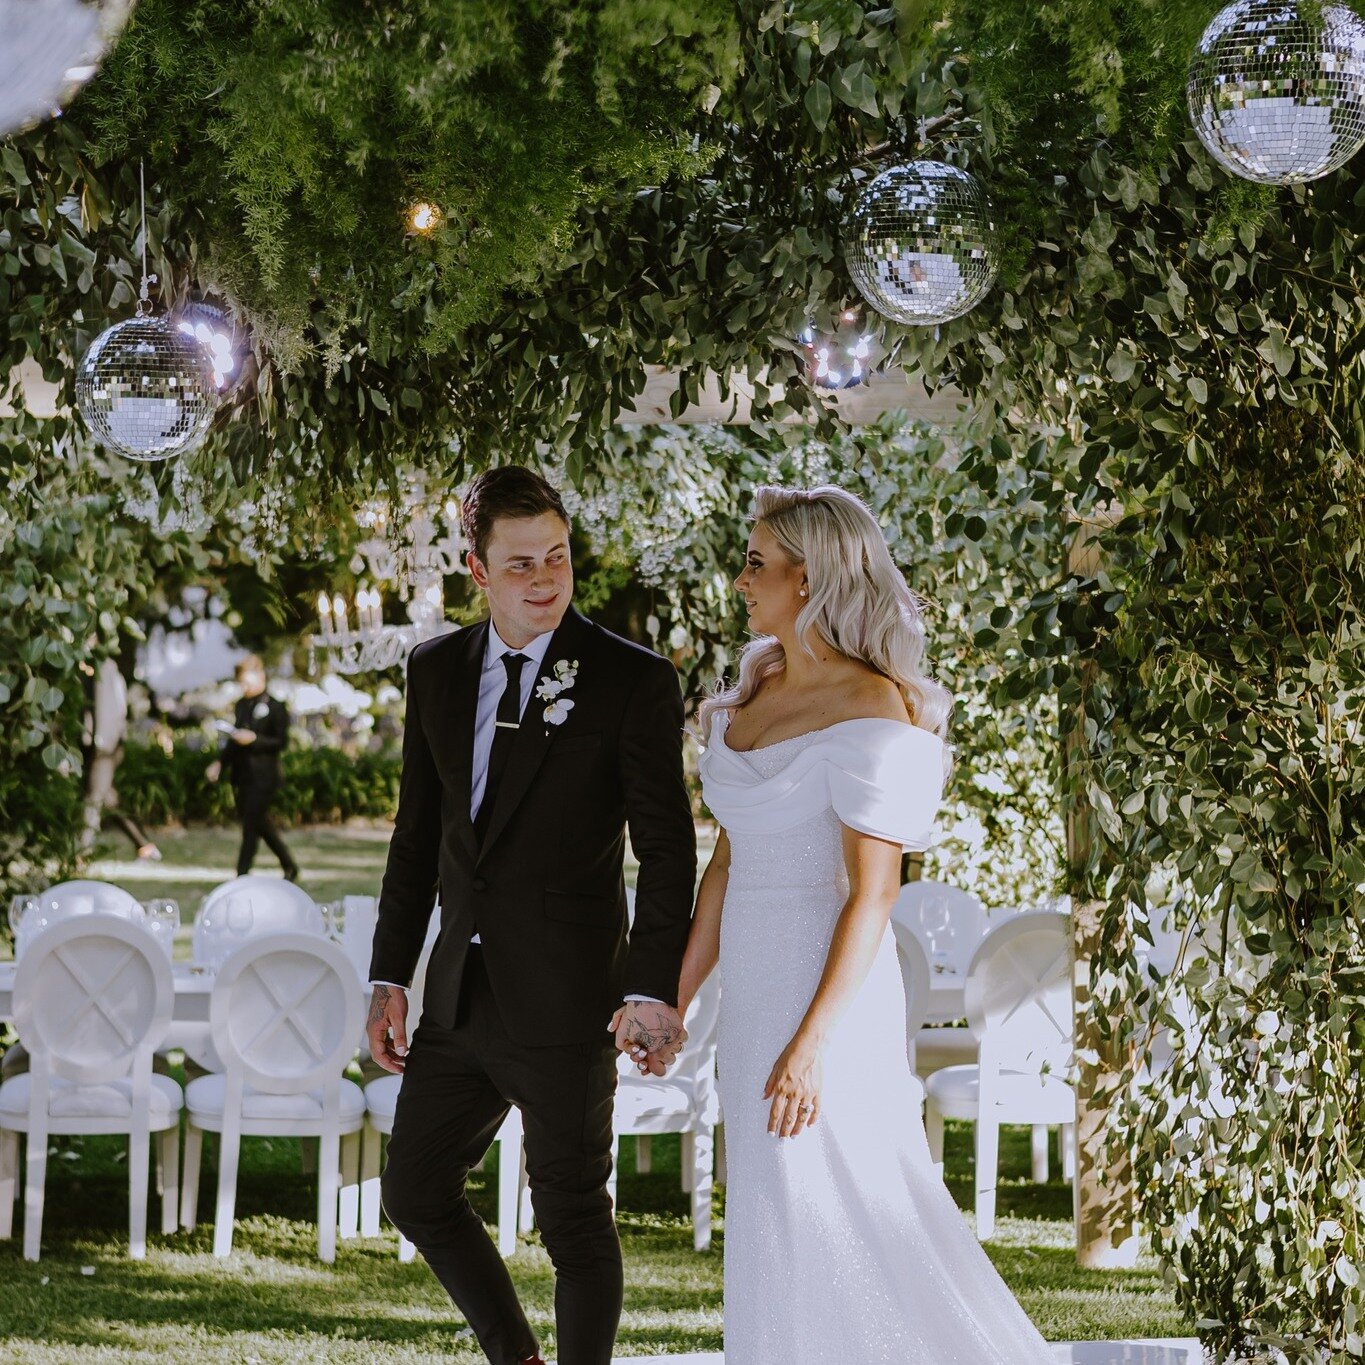 &quot;I find pieces of you in every song I listen to&quot; 

📸: @aglowceleste 

Images owned by Demi Lee Moore Productions Pty LTD, permission to be obtained for usage

#choosenooitgedacht #wedding #love #discoballs #decor #inspo #stellenbosch #wedd